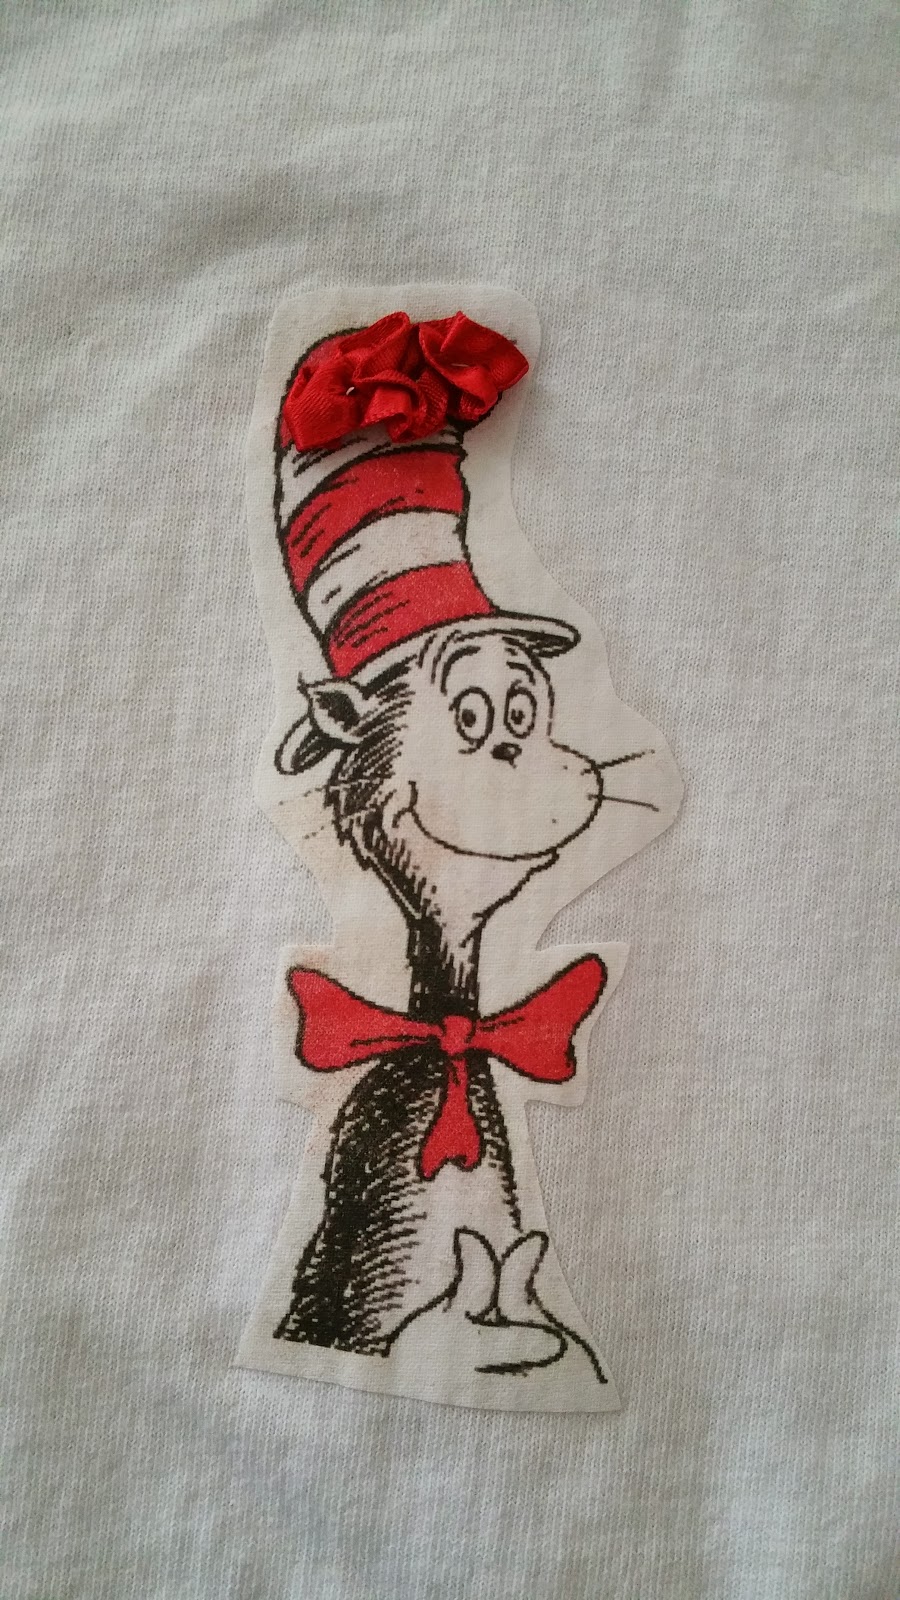 Mrs. Sheets & Co.: How to make a Dr. Seuss T-shirt